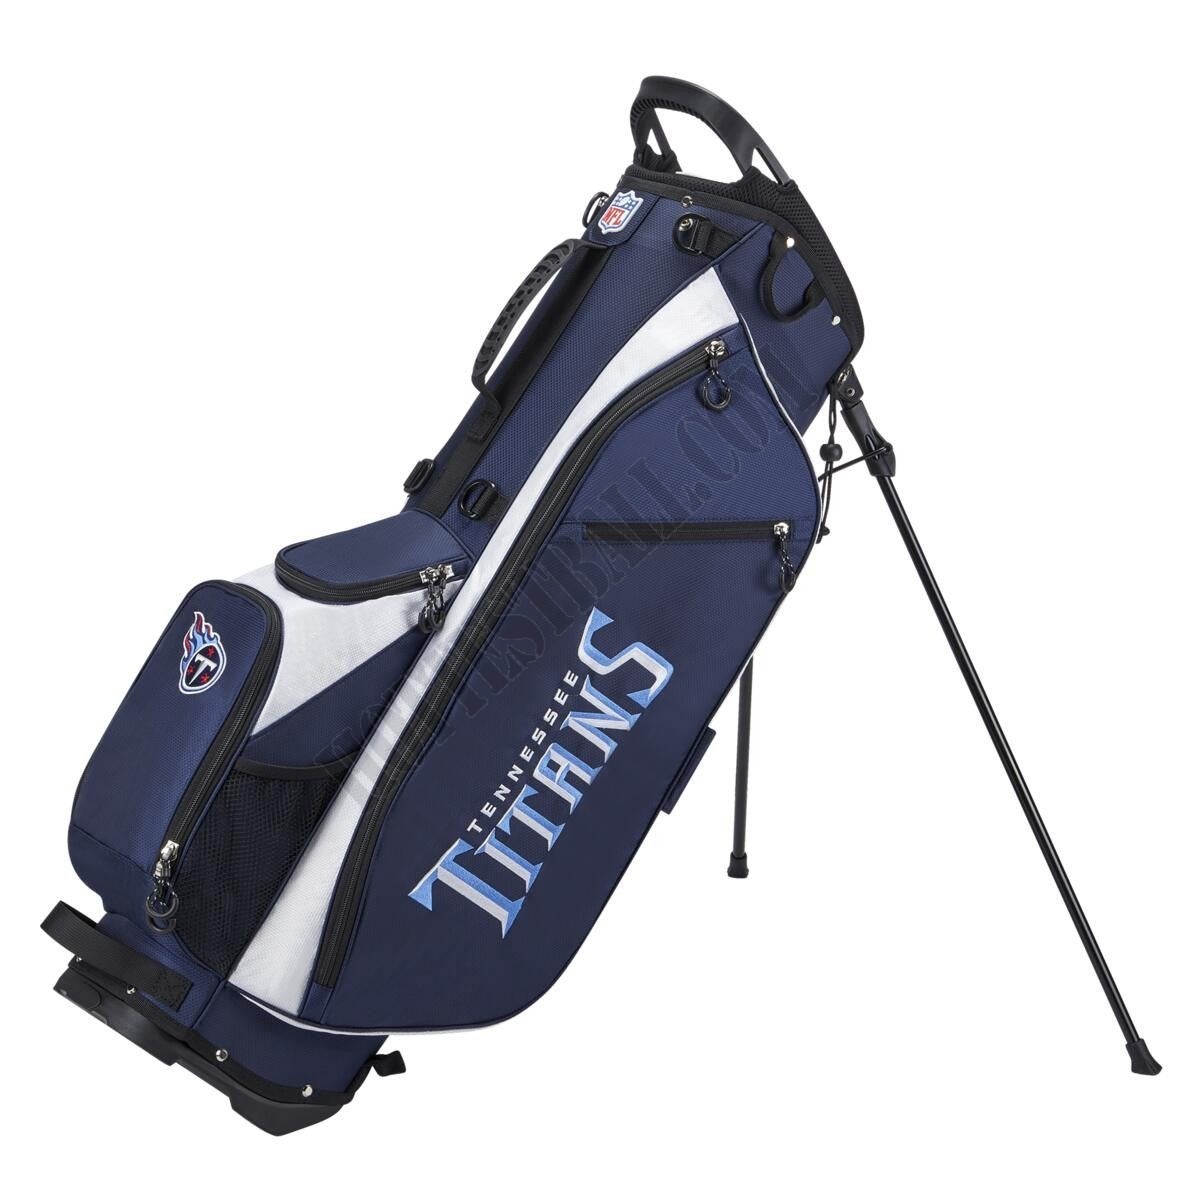 WIlson NFL Carry Golf Bag - Tennessee Titans ● Wilson Promotions - WIlson NFL Carry Golf Bag - Tennessee Titans ● Wilson Promotions